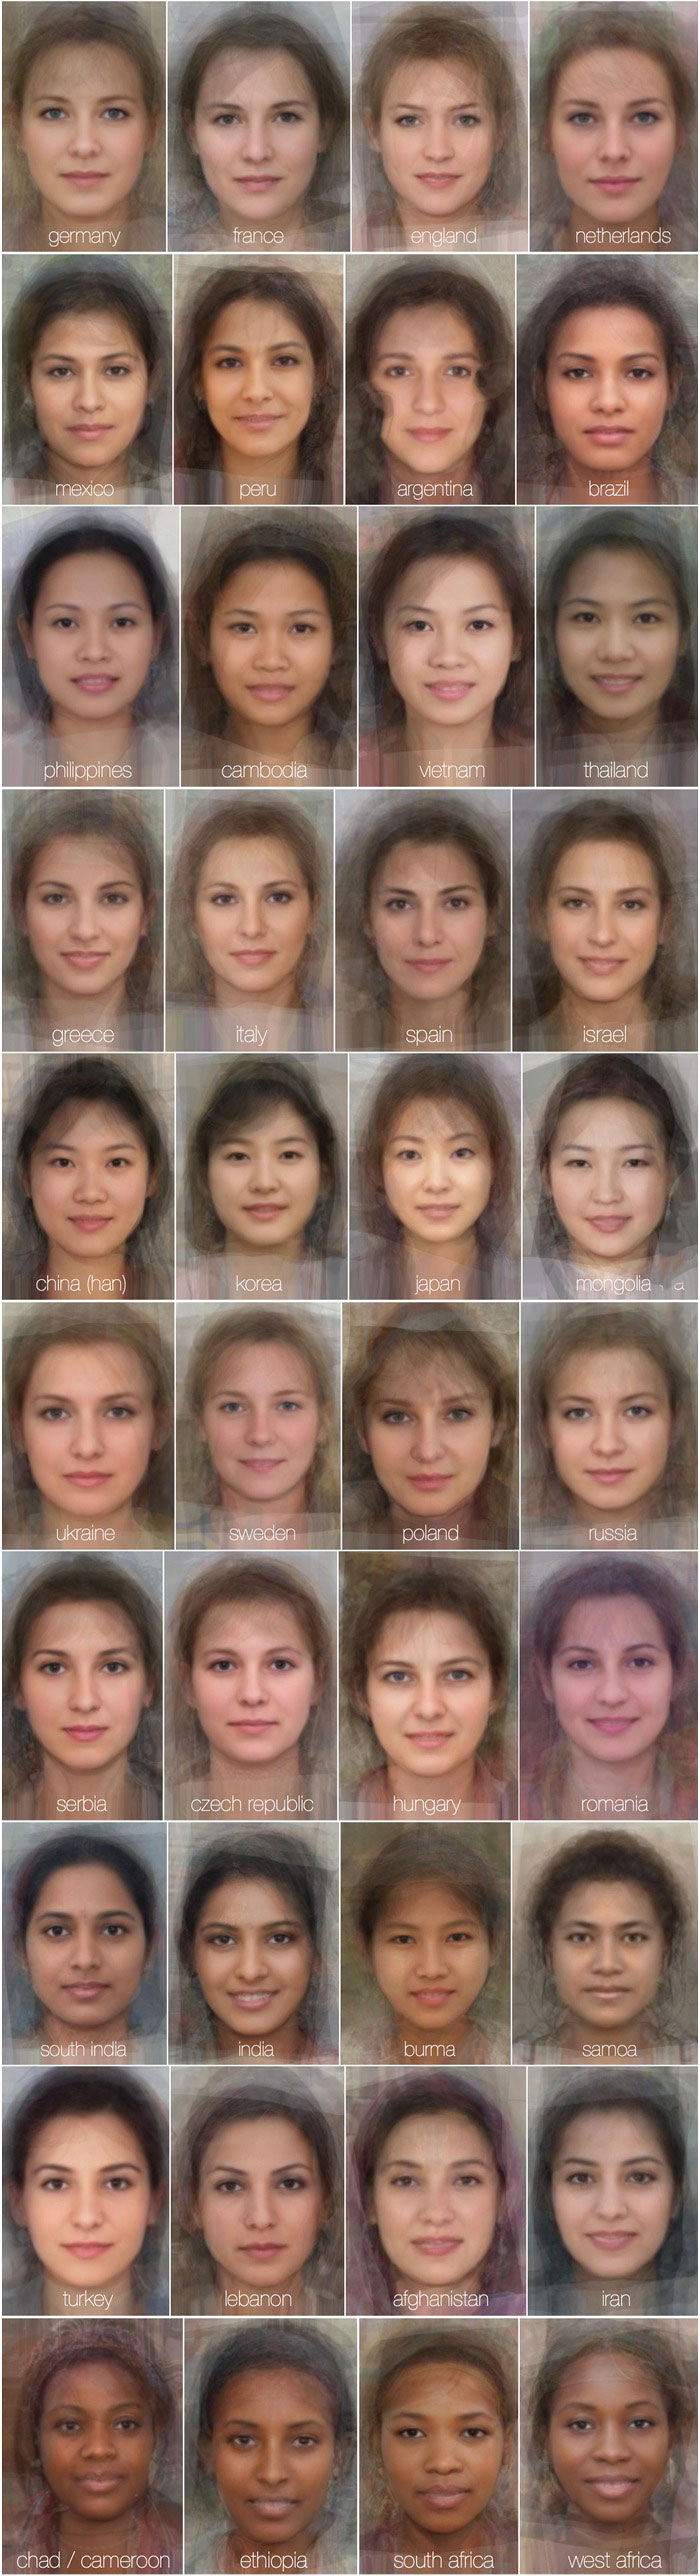 women faces around the world, nationality, country, average